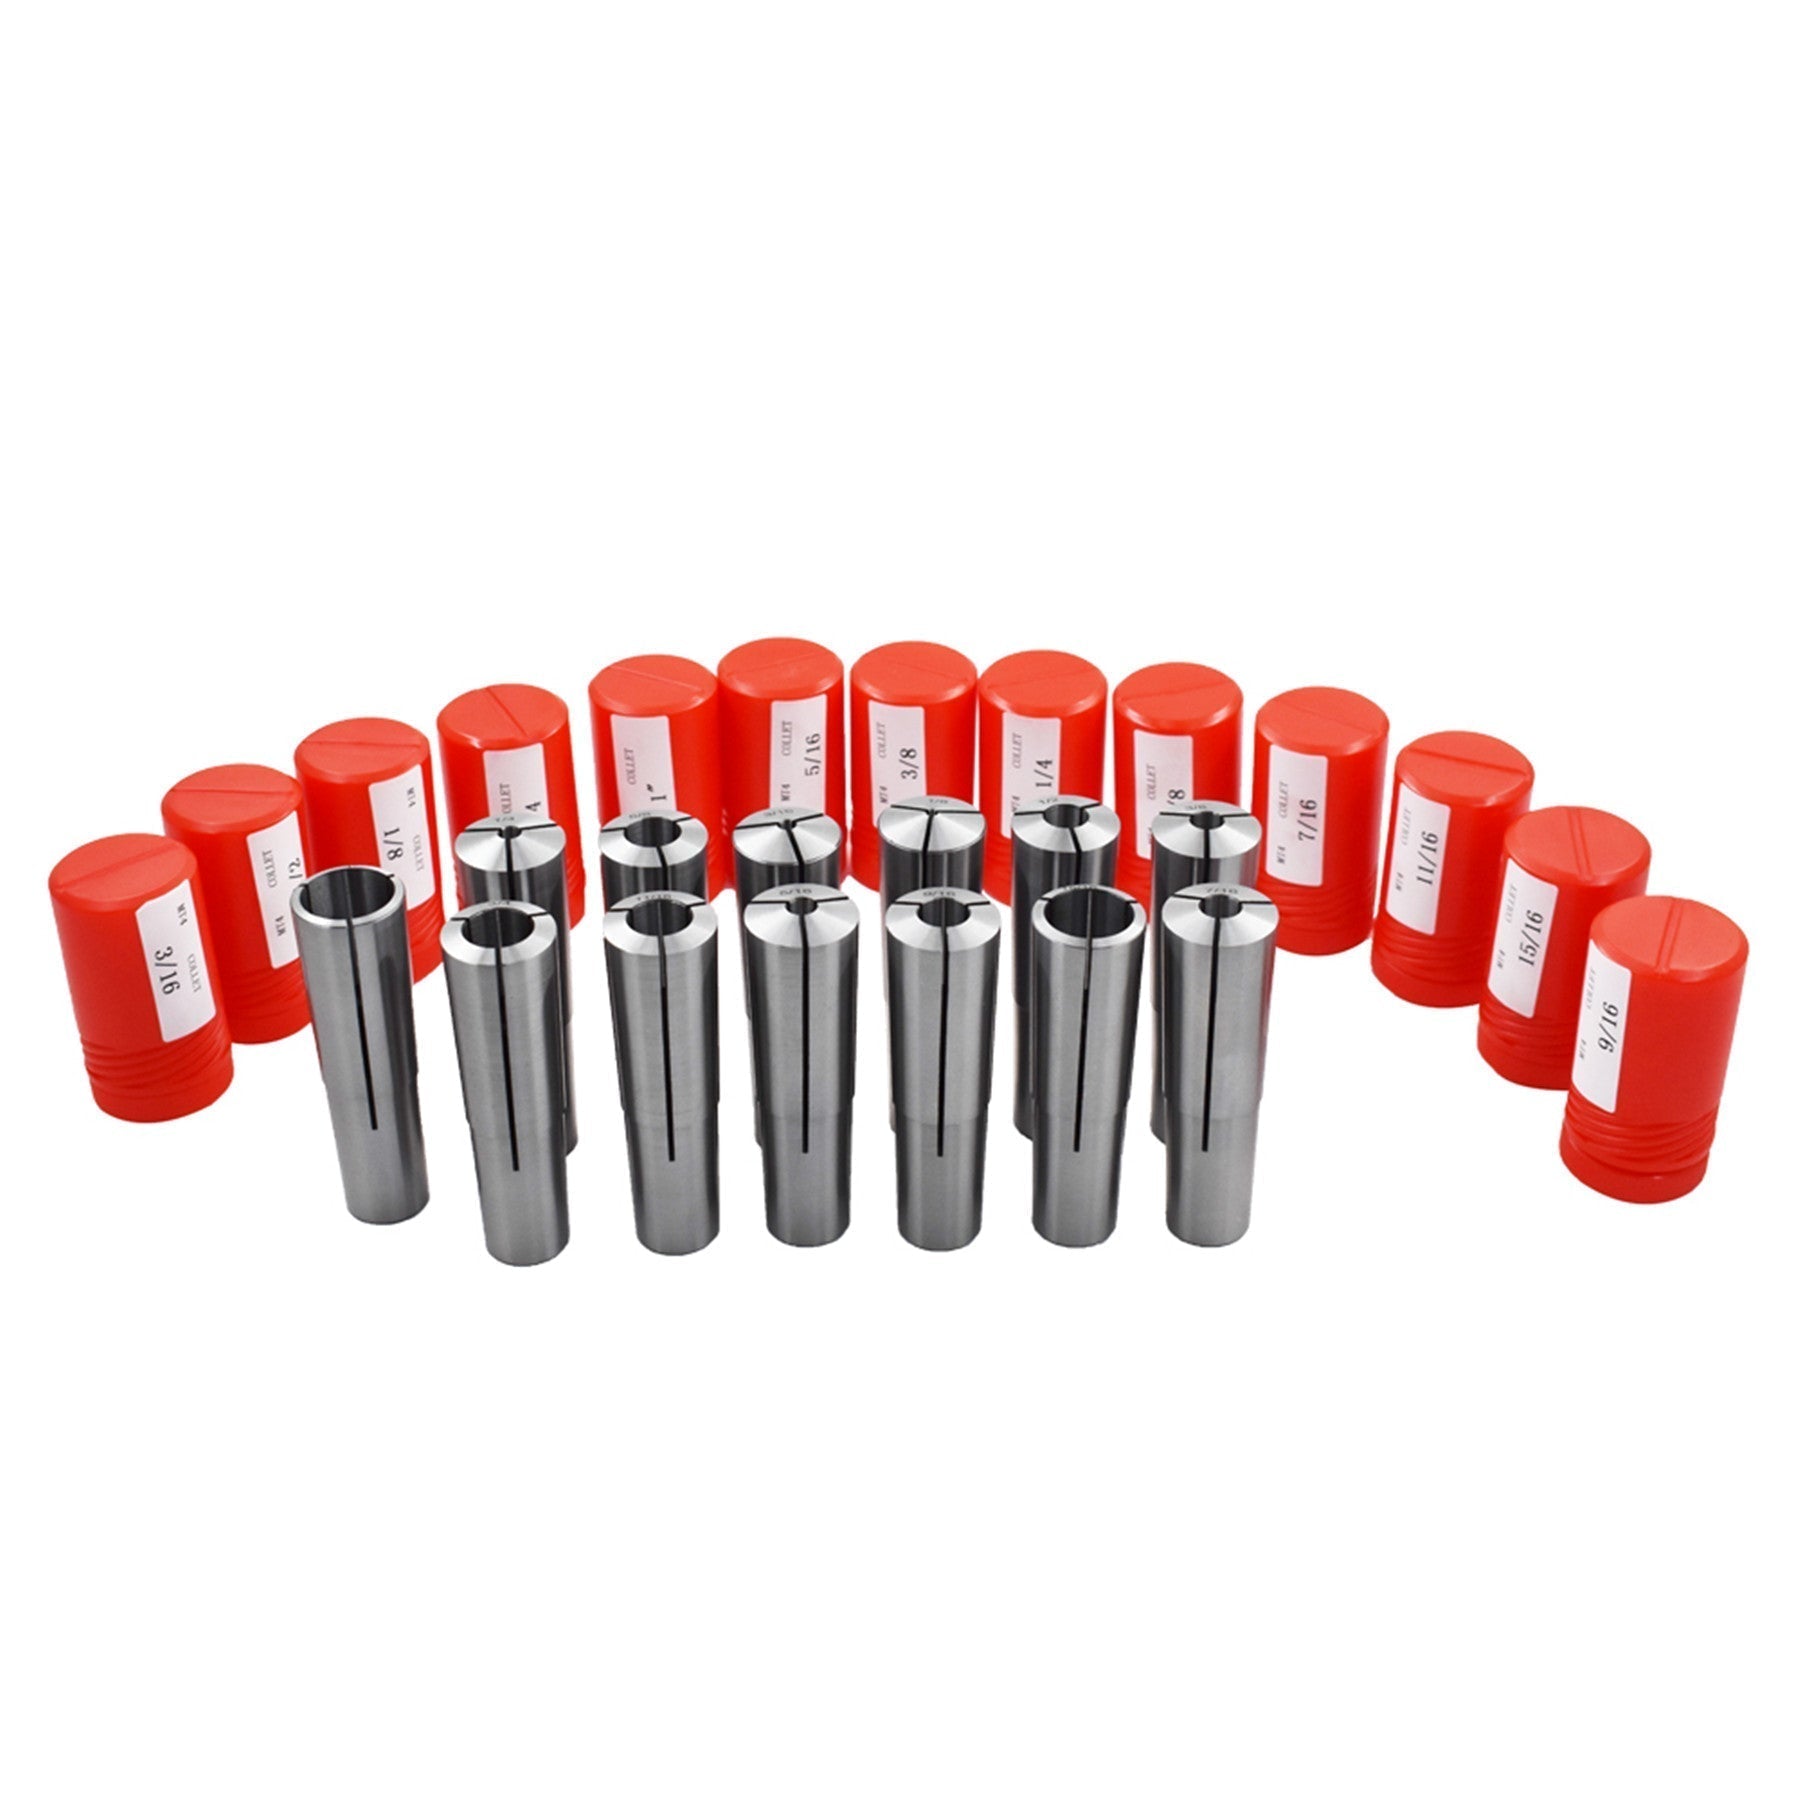 findmall 4MT Morse Taper Collet 13 Pcs Set 1/8" - 1" With 3/16 1/4 3/8 1/2 5/8 3/4 Fit For Bridgeport FINDMALLPARTS